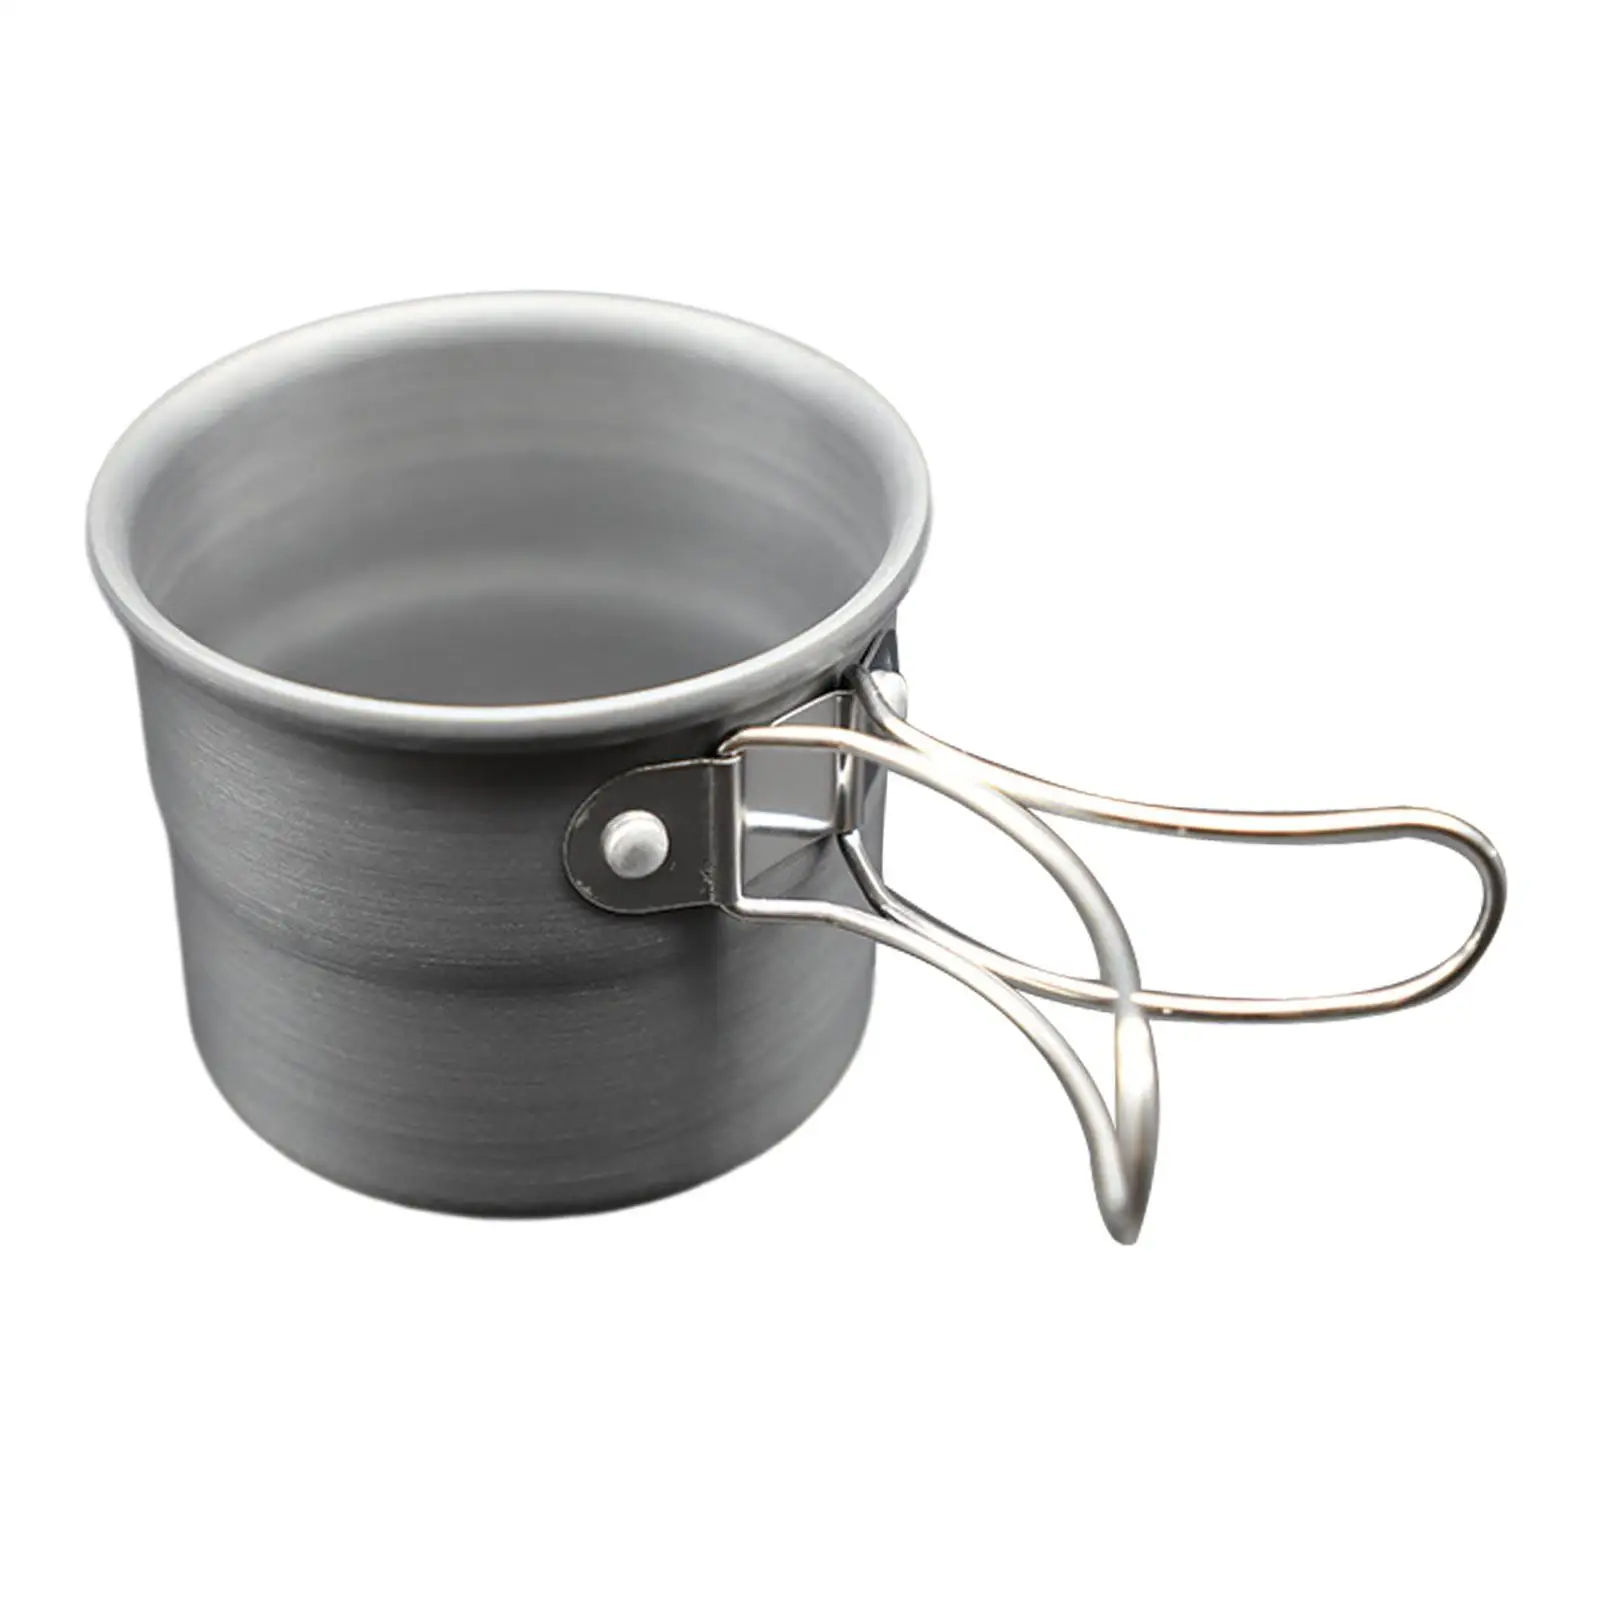 Camping Cup Water Cup with Folding Handles Pot Coffee Mug Aluminium Lightweight Portable for Outdoor Cooking Touring Trips